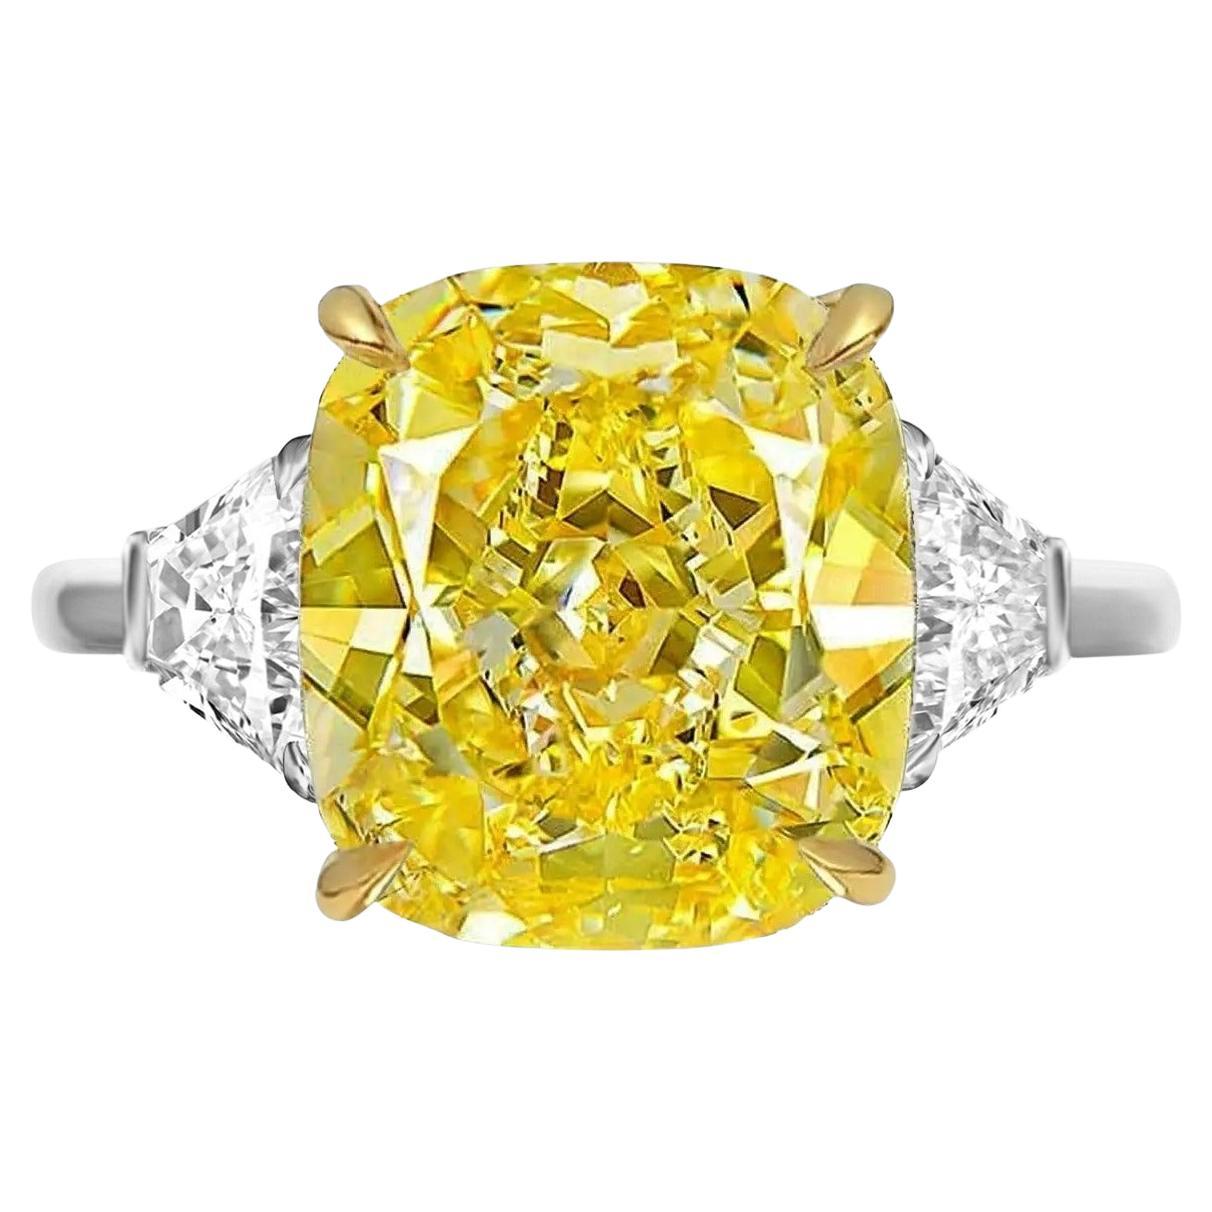 GIA Certified 4 Carat Fancy Light Yellow Cushion Diamond Ring I Flawless For Sale